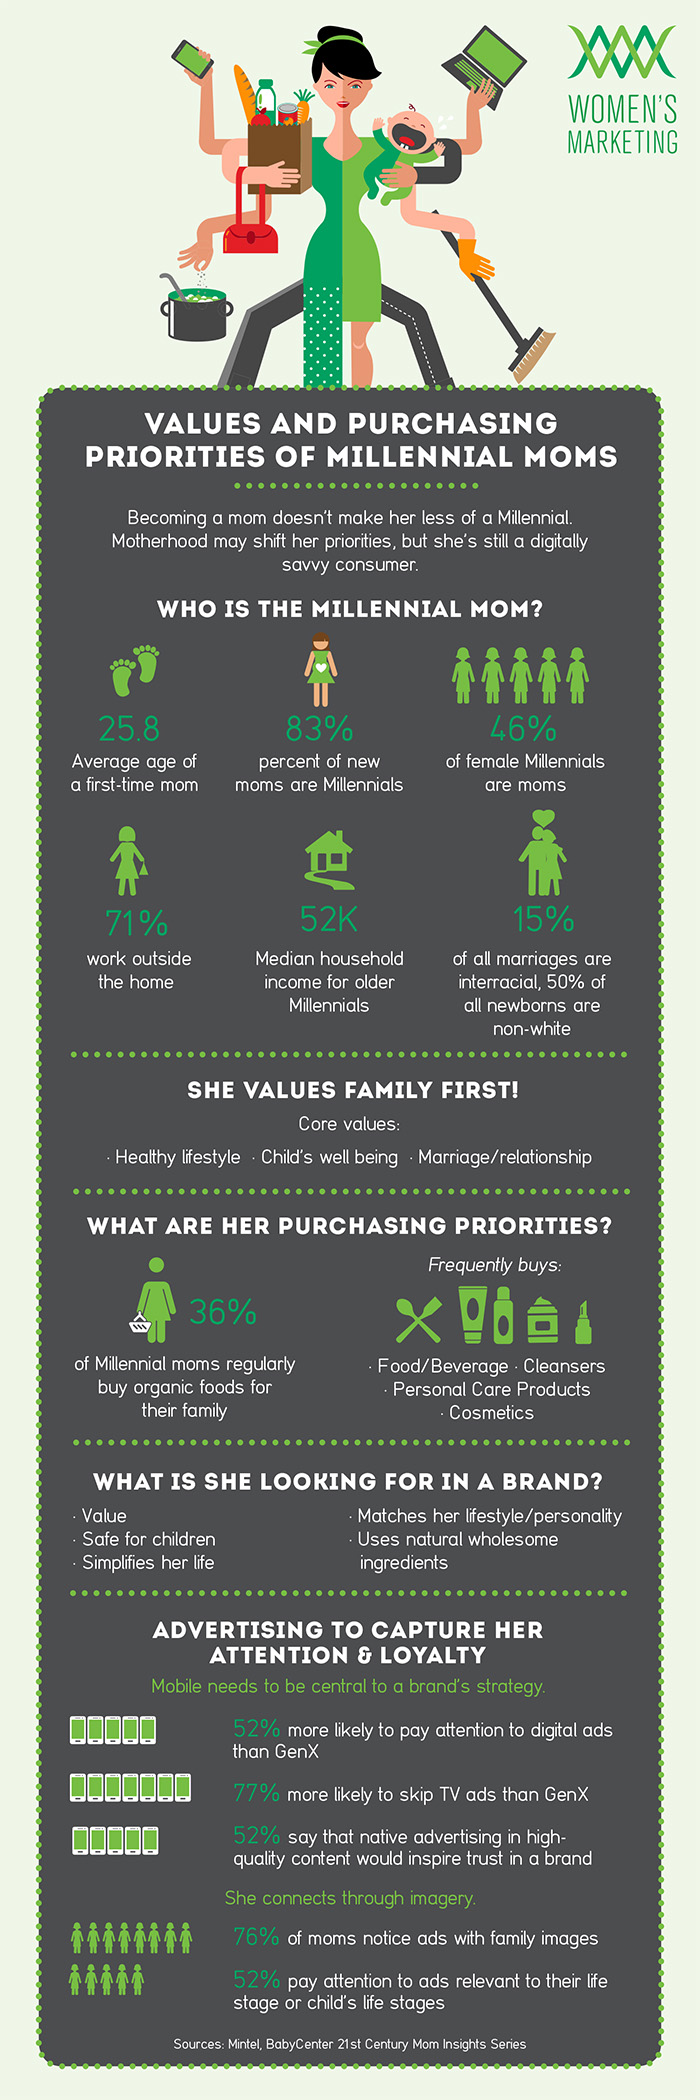 Values and Purchasing Priorities of Millennial Moms